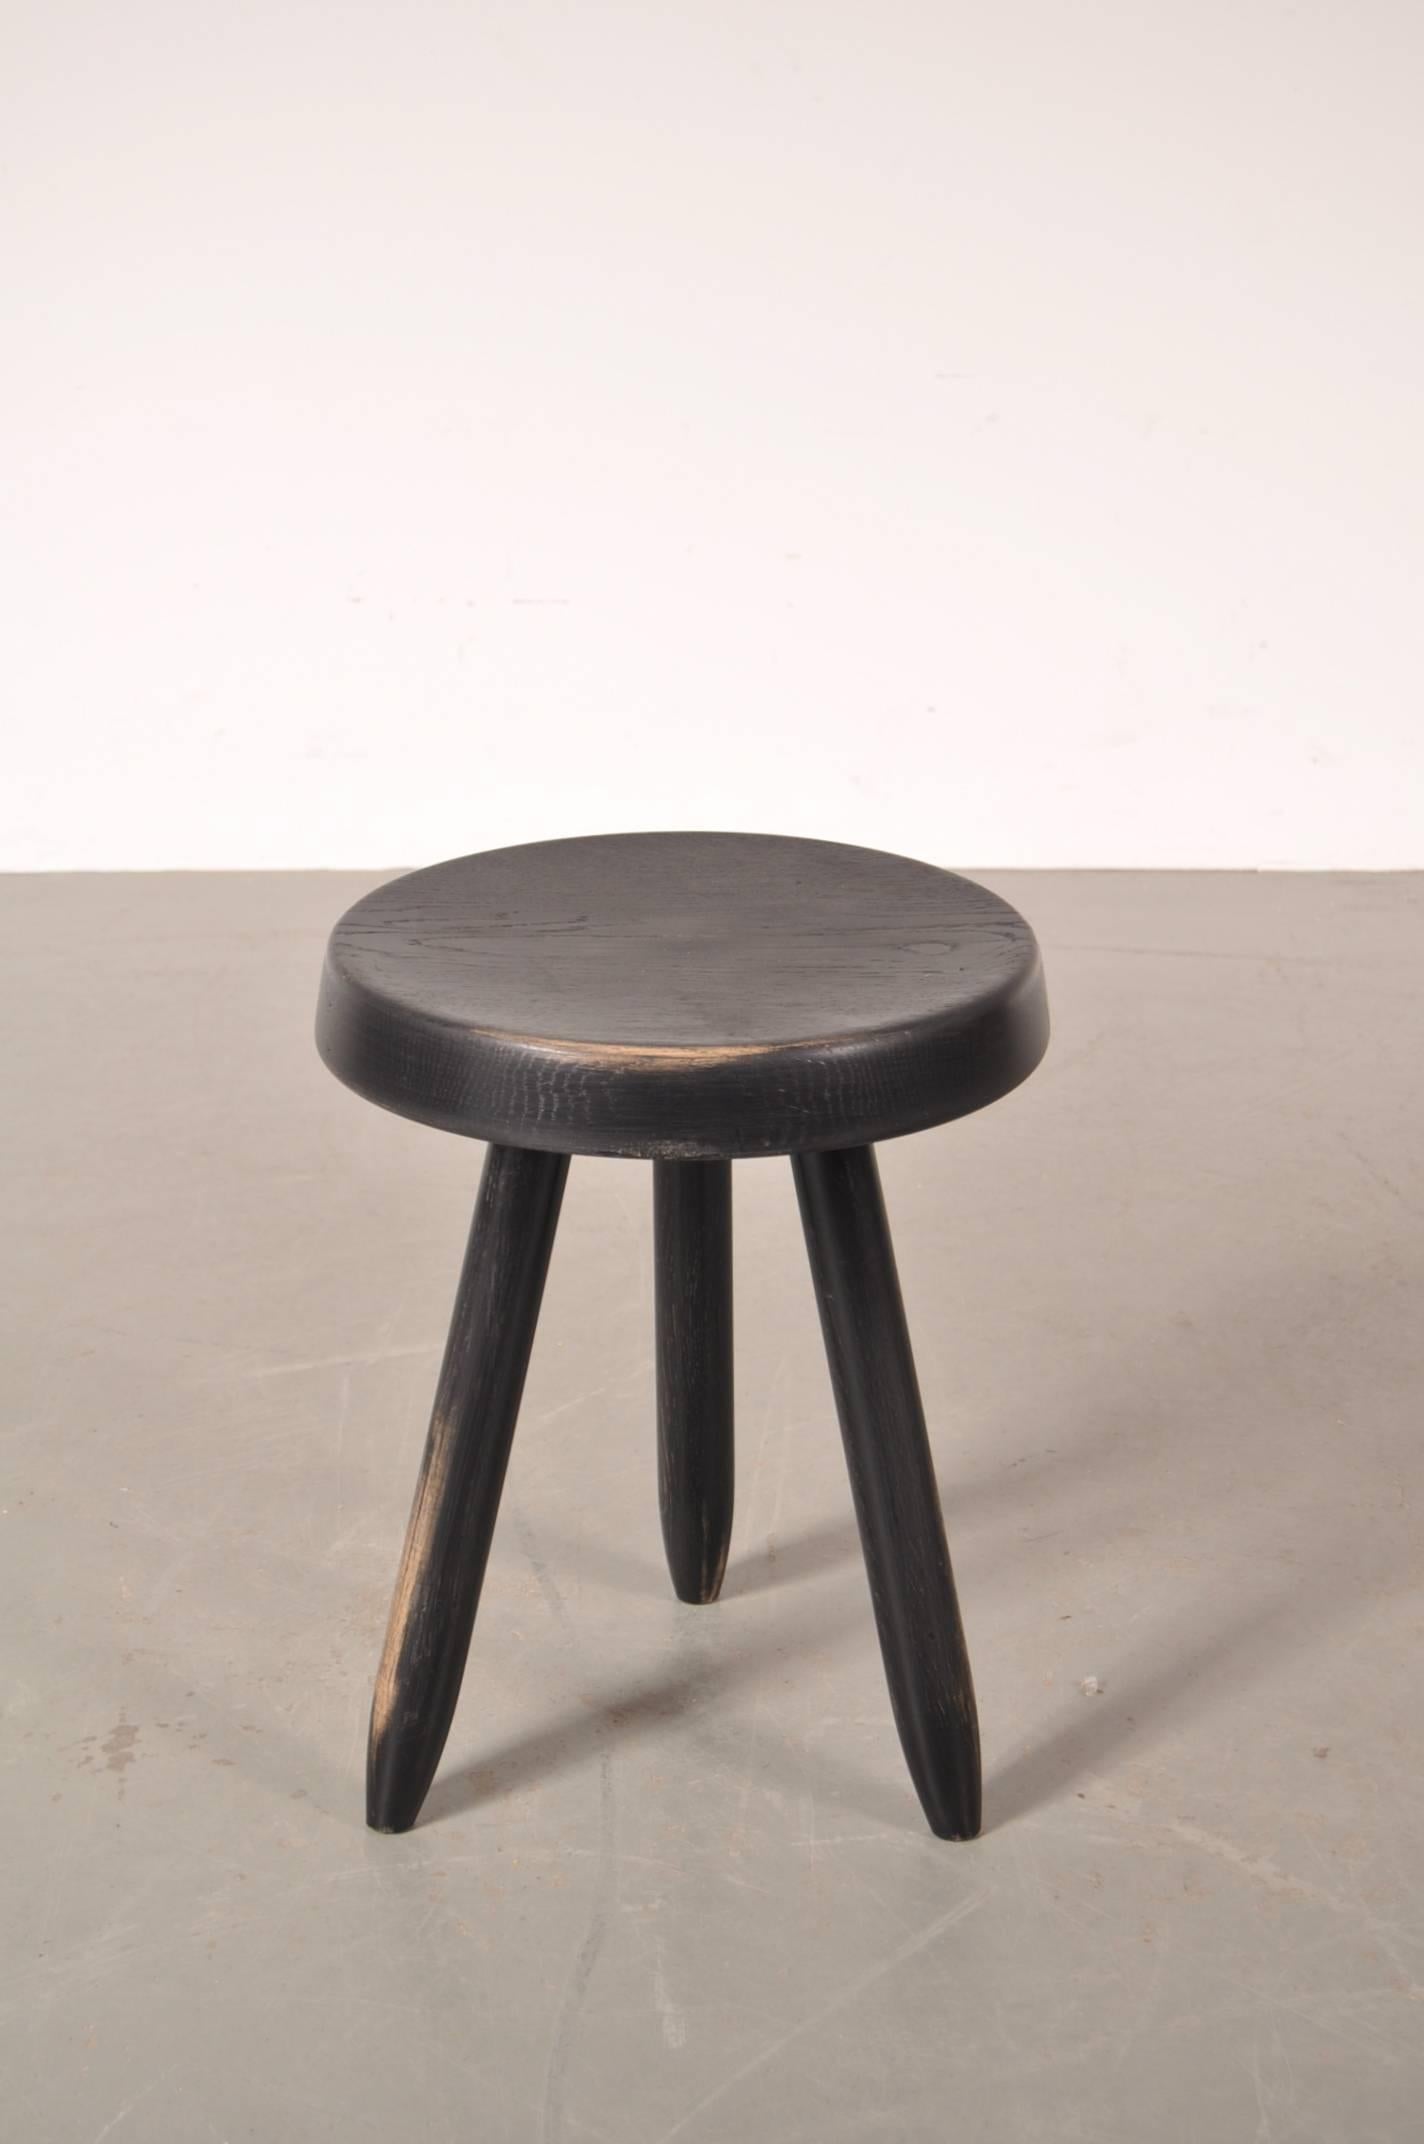 French Stool by Charlotte Perriand for Les Arcs, France, circa 1950